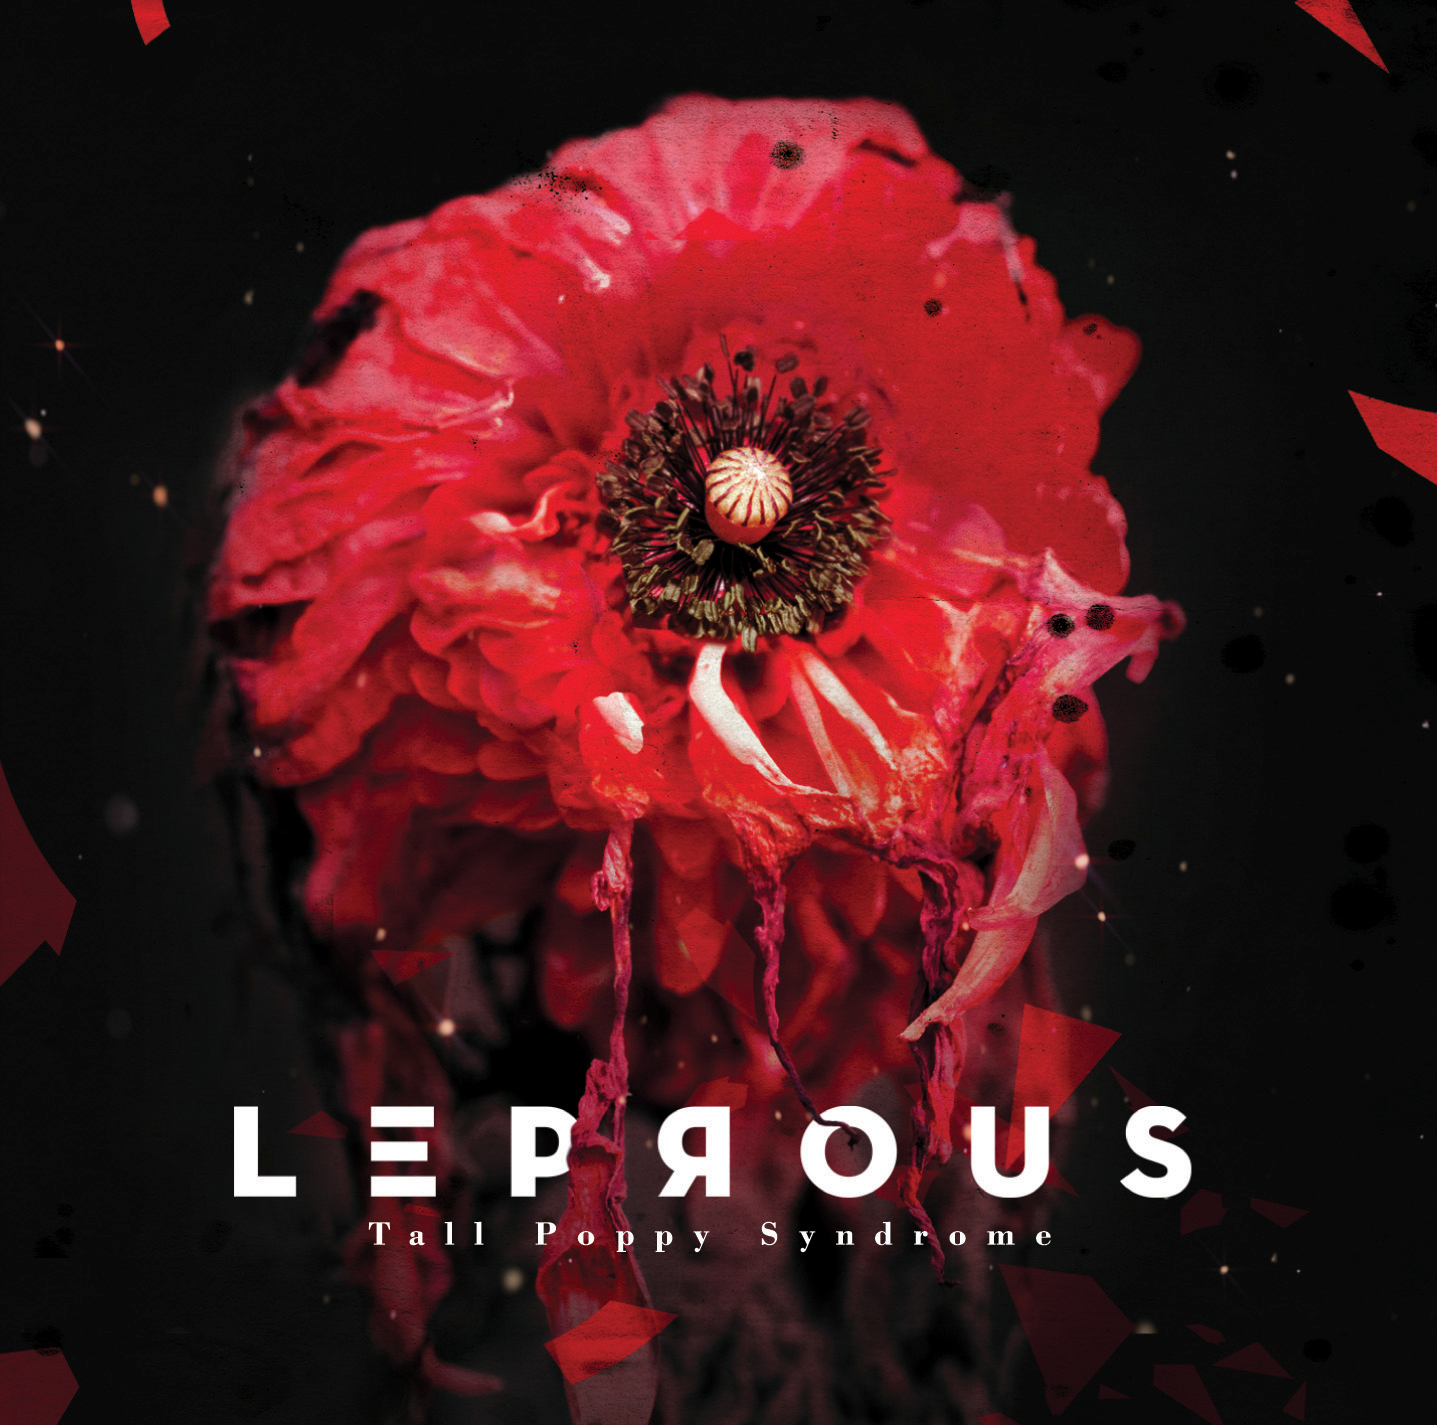 Tall Poppy Syndrome — Leprous | Last.fm